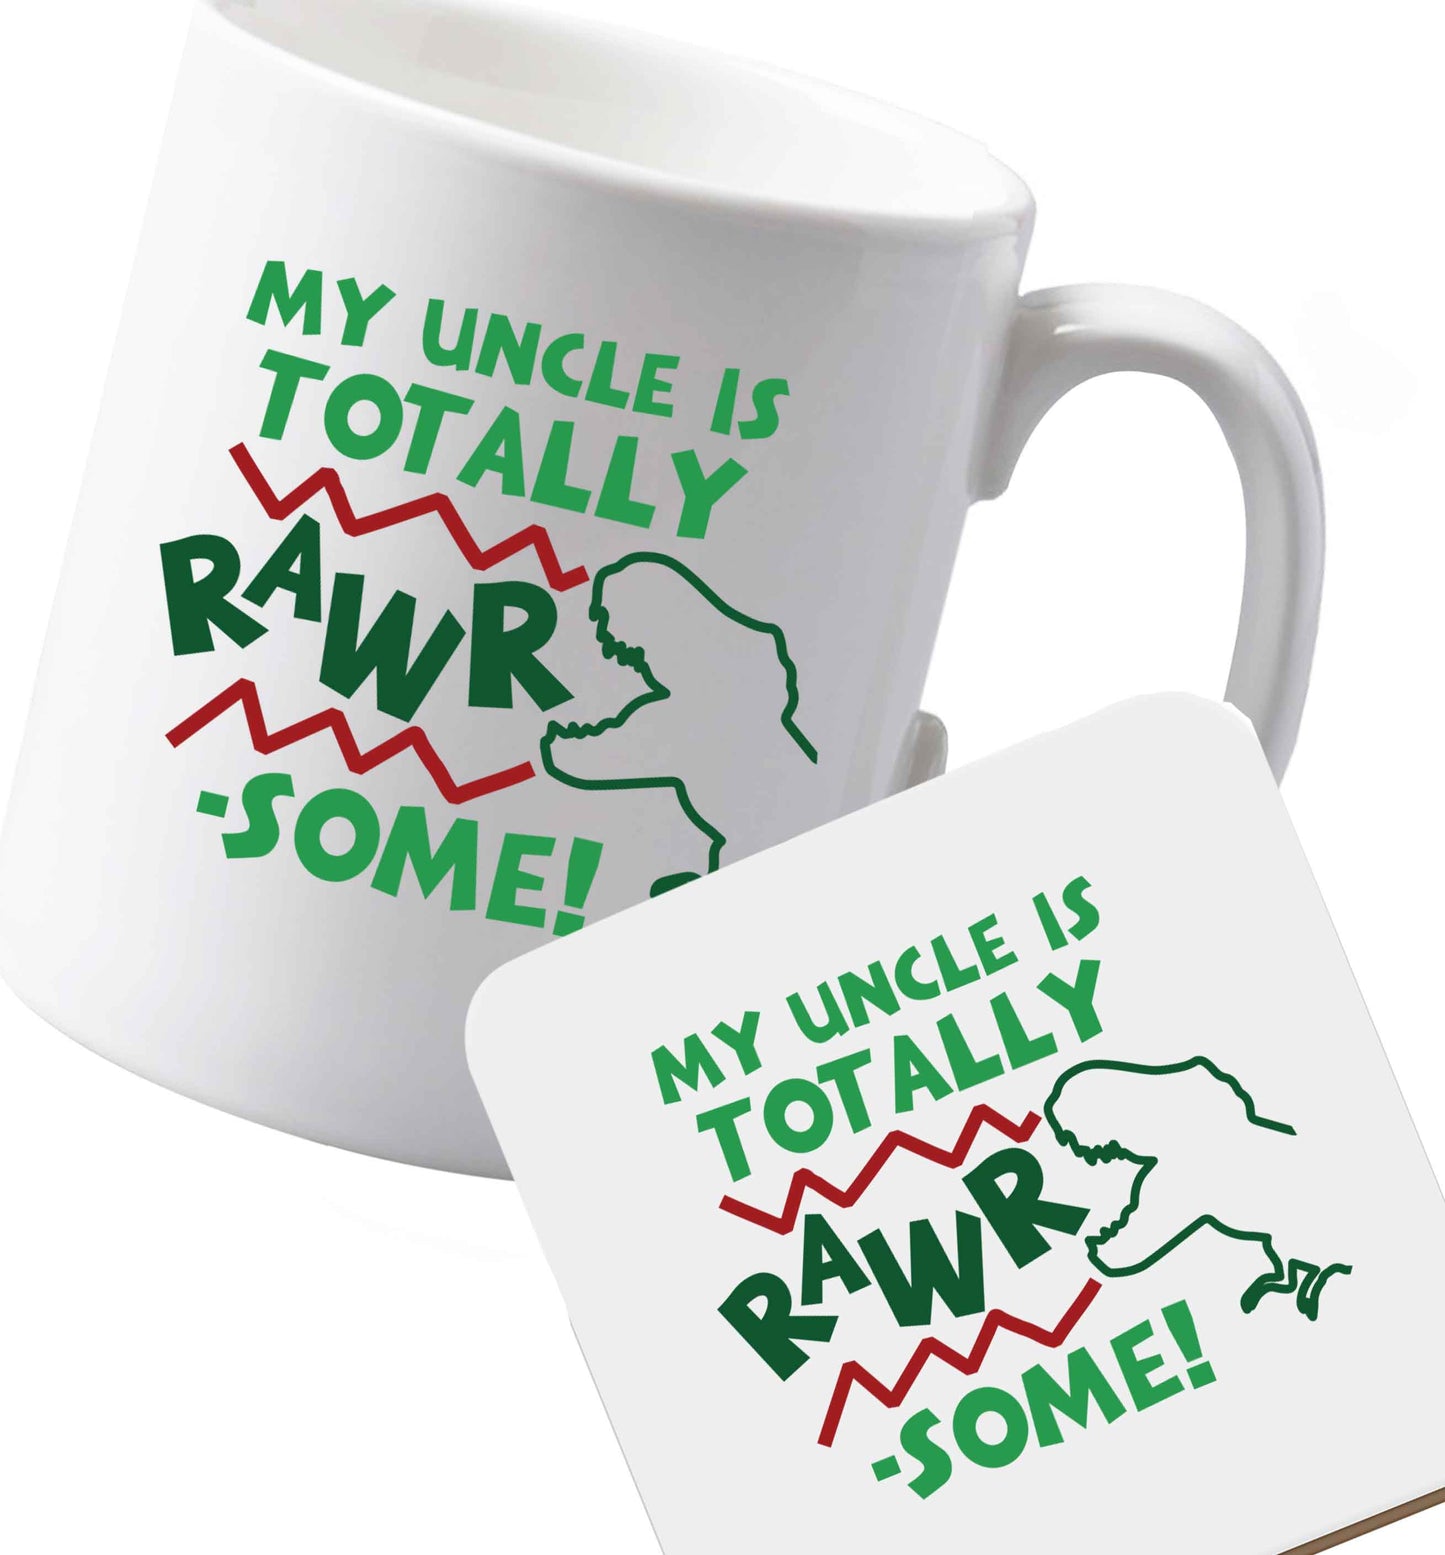 10 oz Ceramic mug and coaster My uncle is totally rawrsome both sides